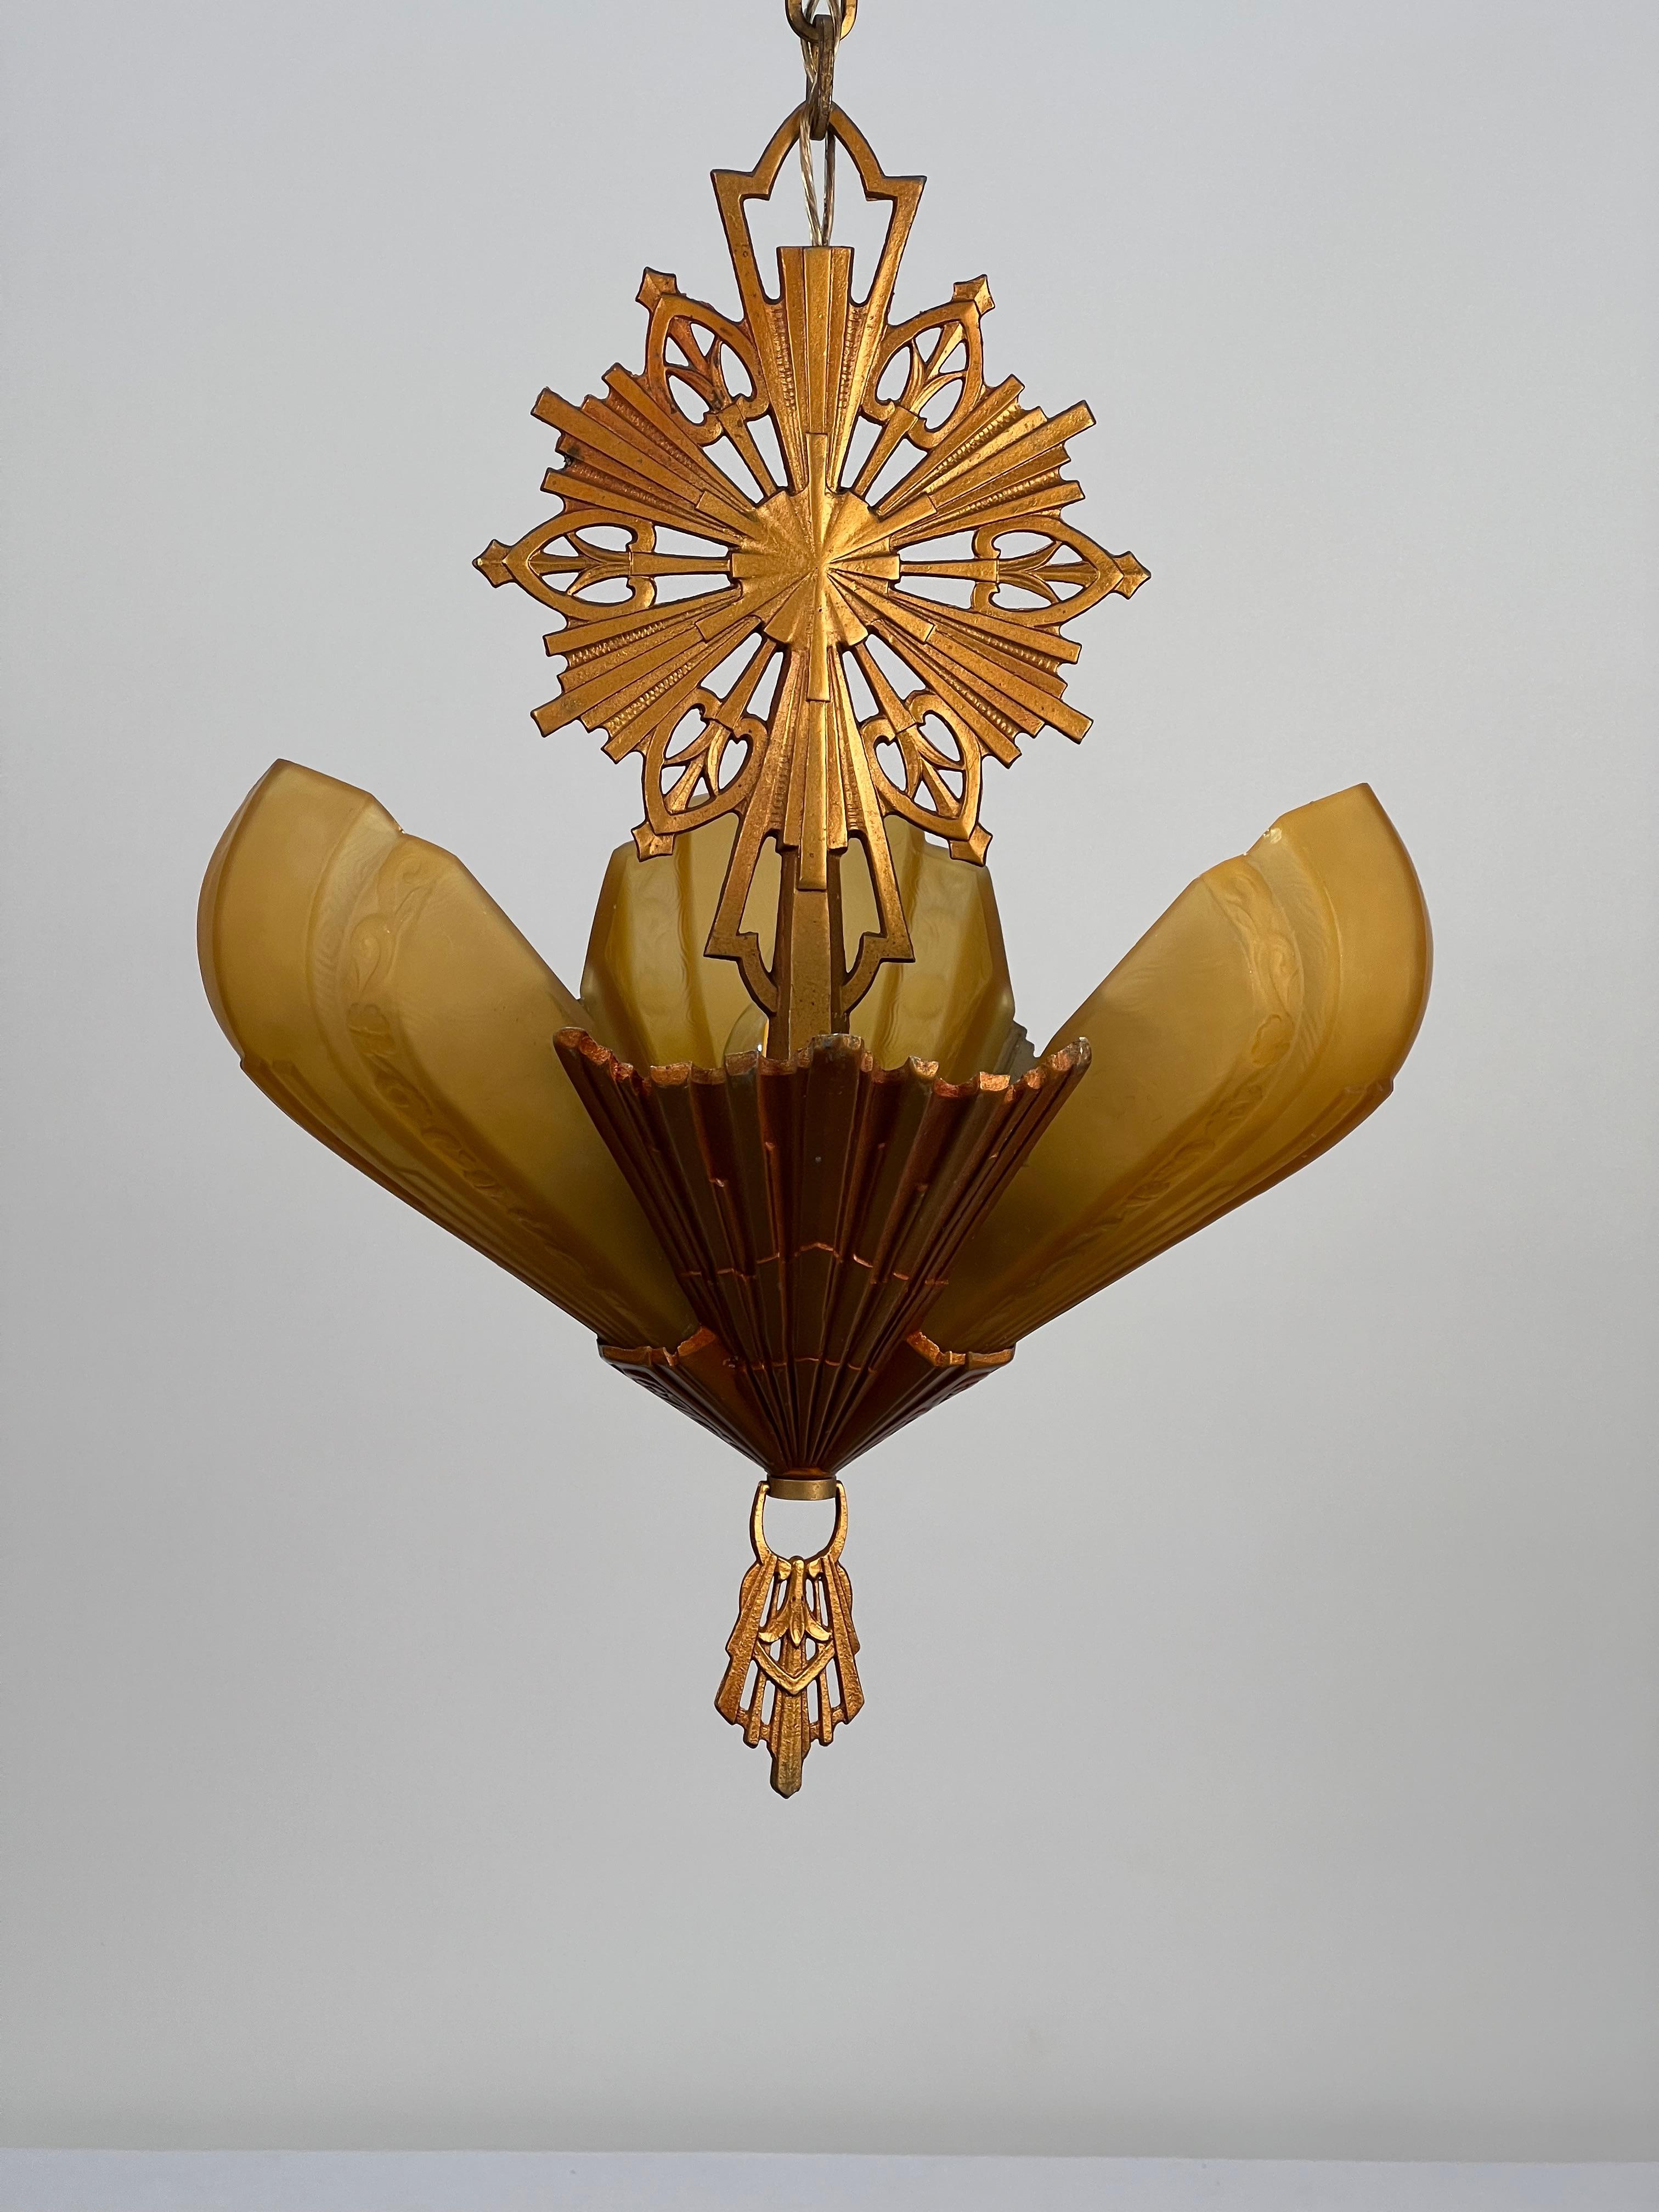 A spectacular art deco three light fixture featuring beautifully detailed amber glass slip shades. The wave texture present on the inside of the glass projects to the outside as a subtle texture. The glass shades are bordered with embossing's of